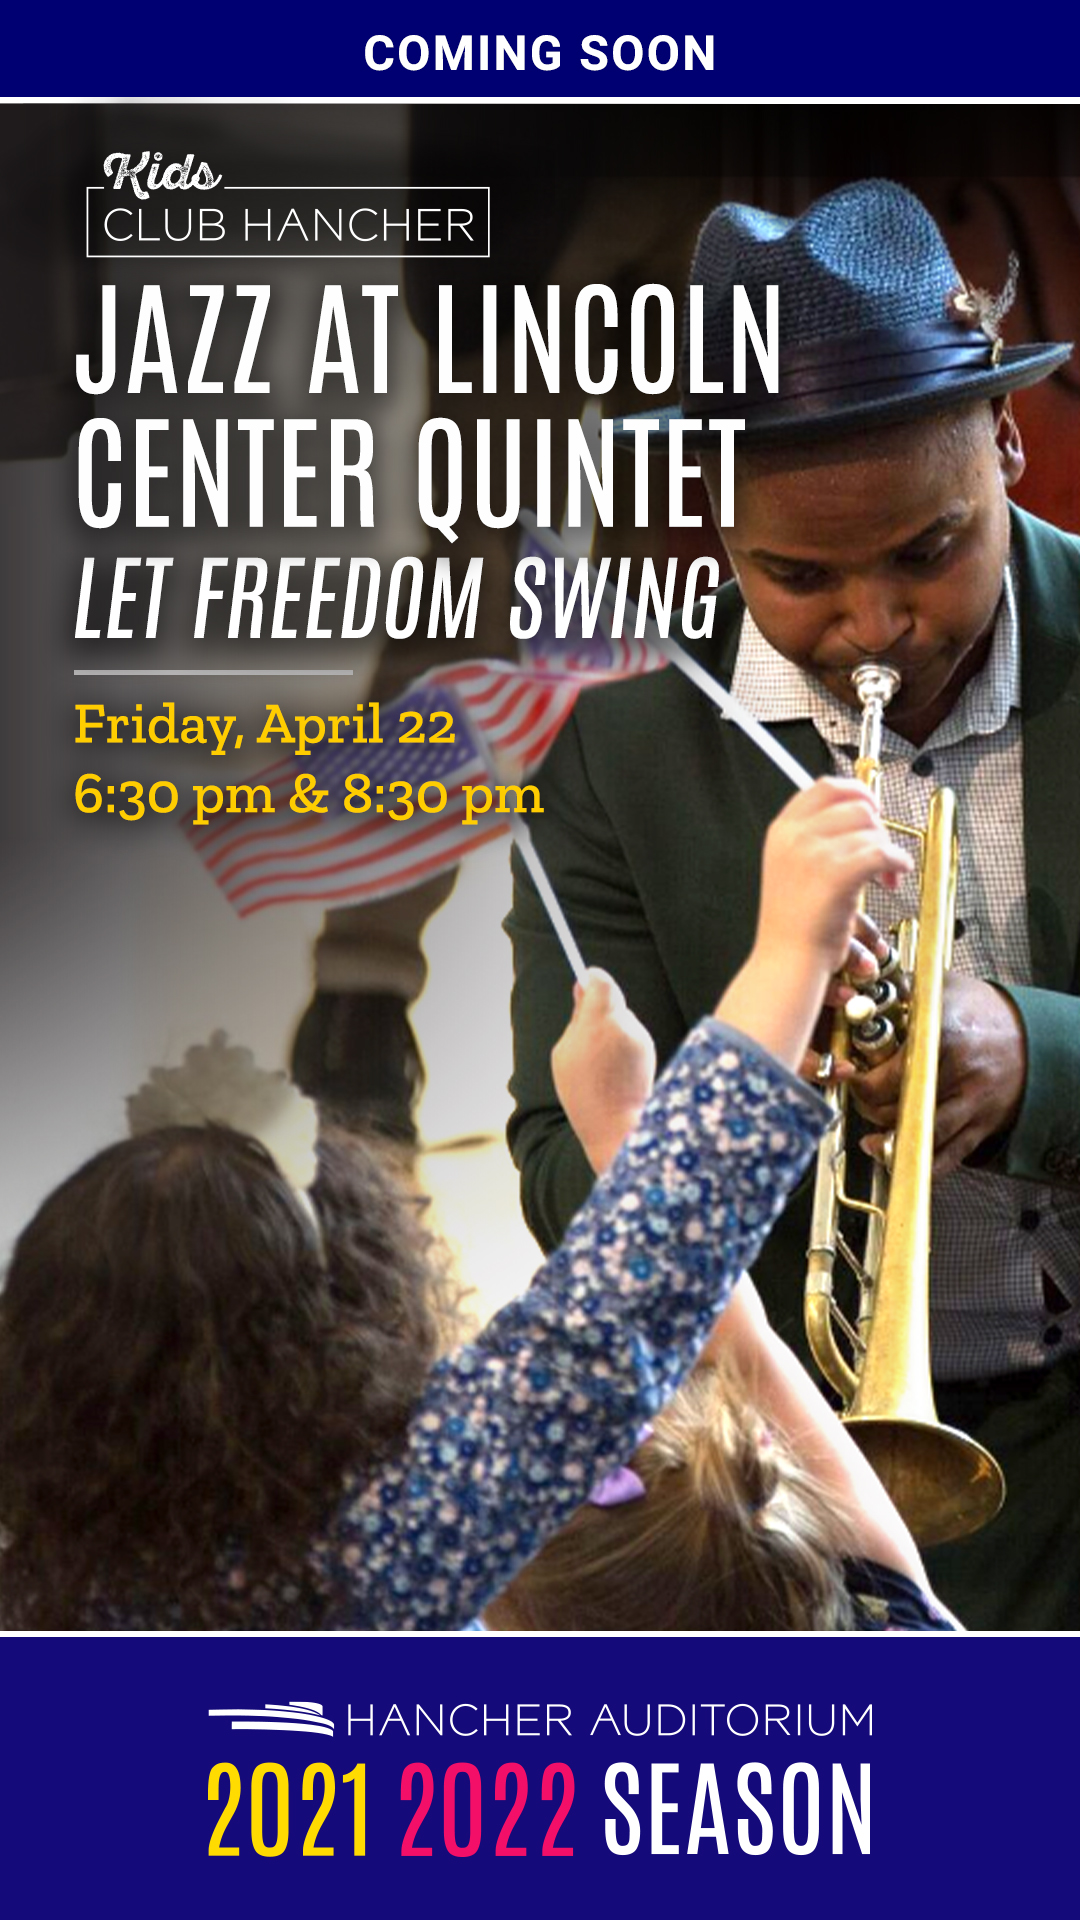 Kids Club Hancher: Jazz at Lincoln Center Quintet, "Let Freedom Swing"